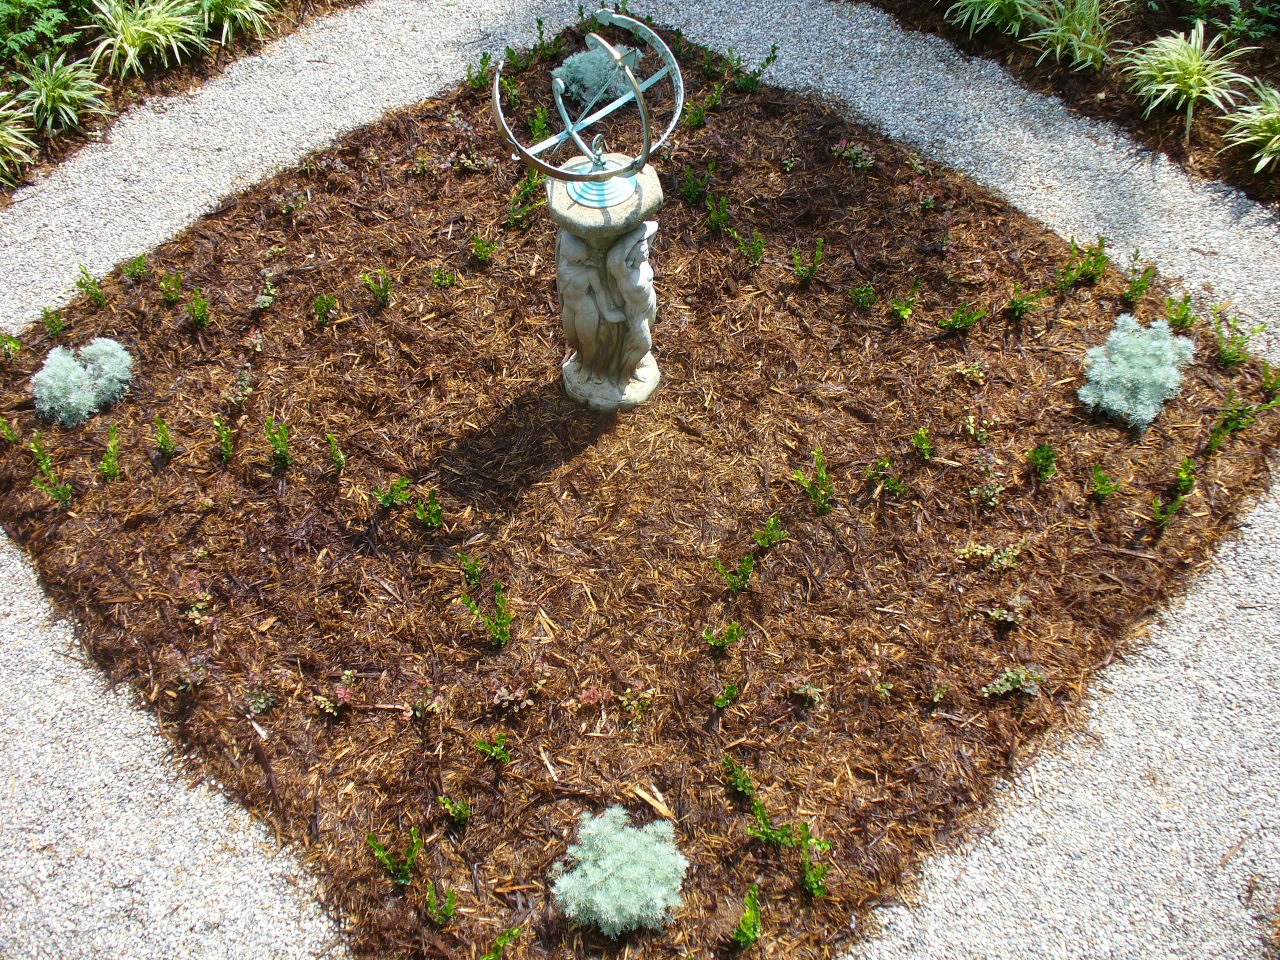 Elysium's Knot Garden (newly planted)